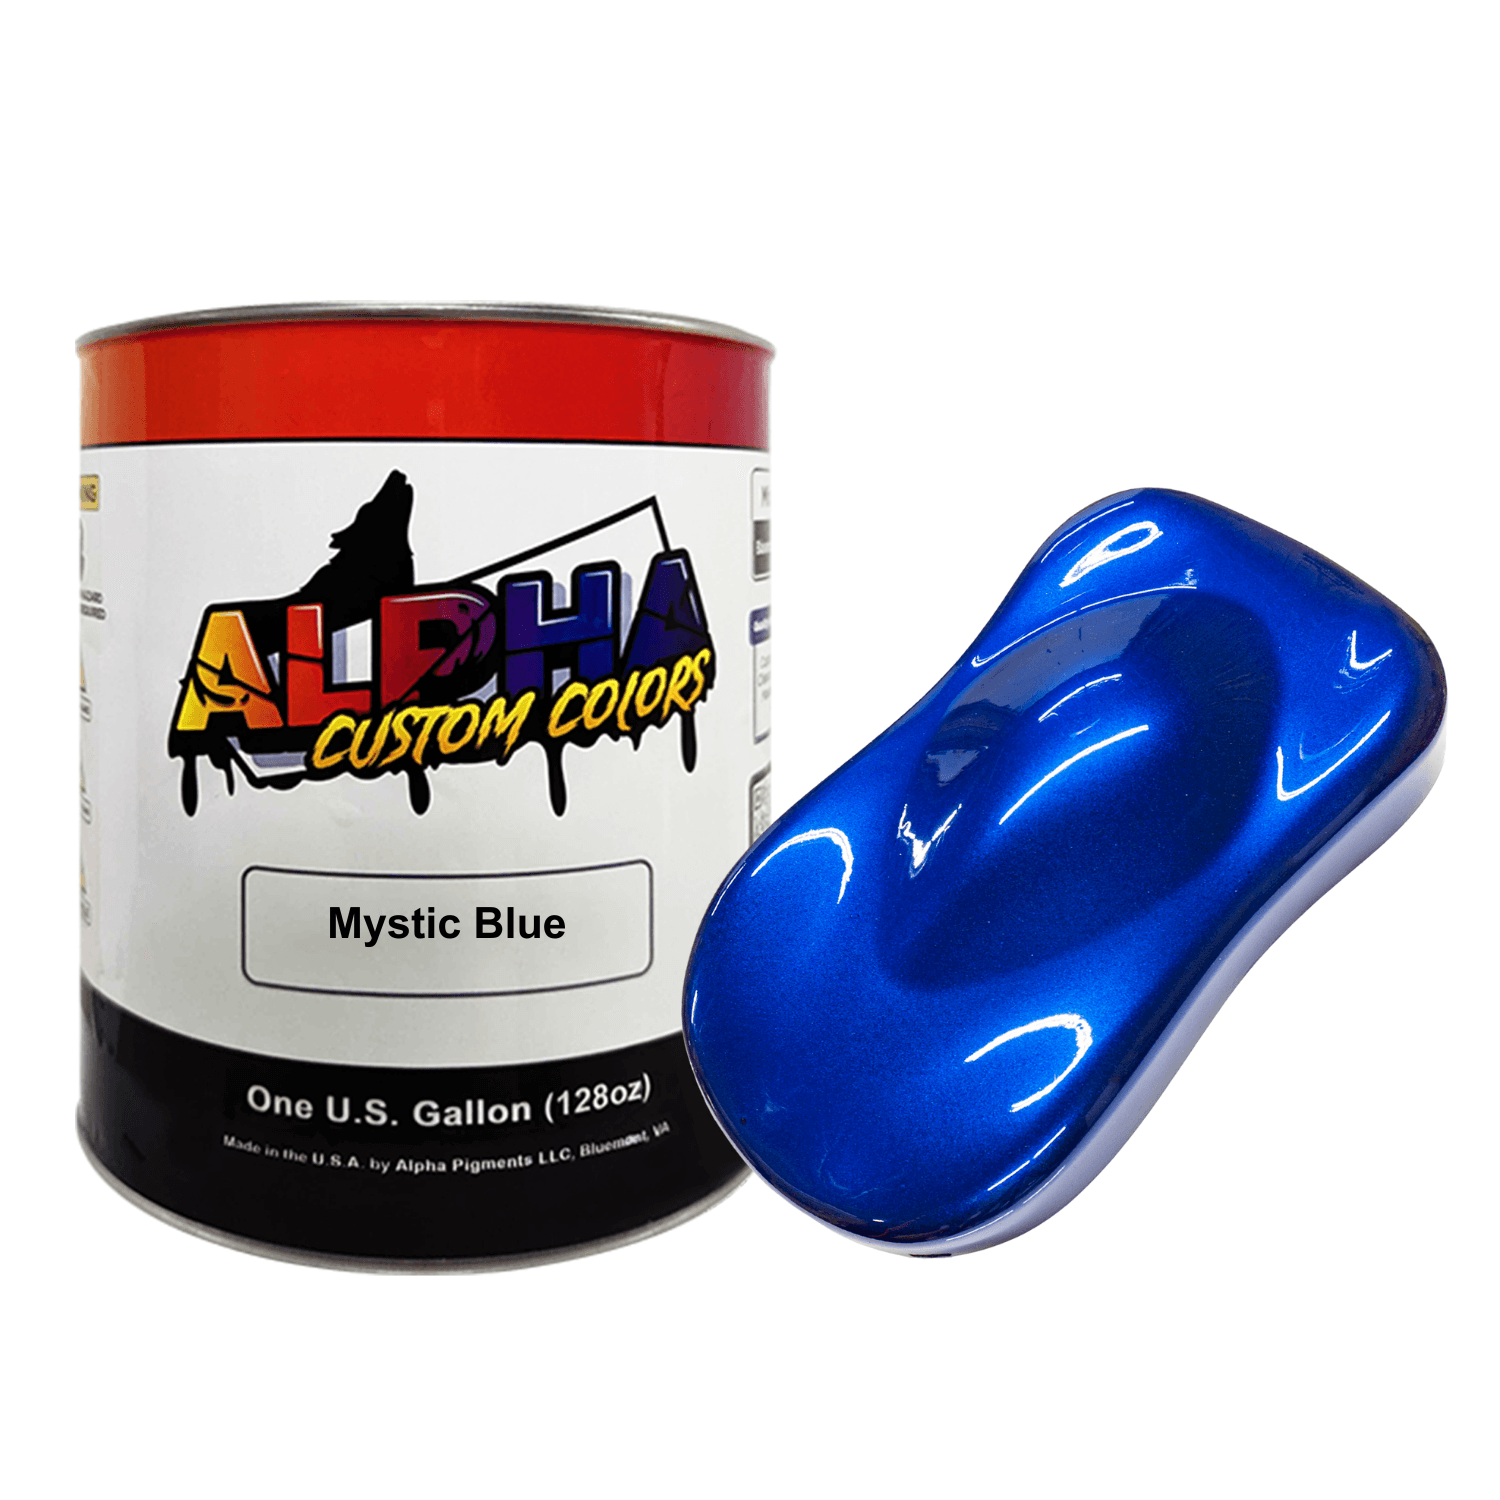 Ace Mystic Blue Precisely Matched For Paint and Spray Paint